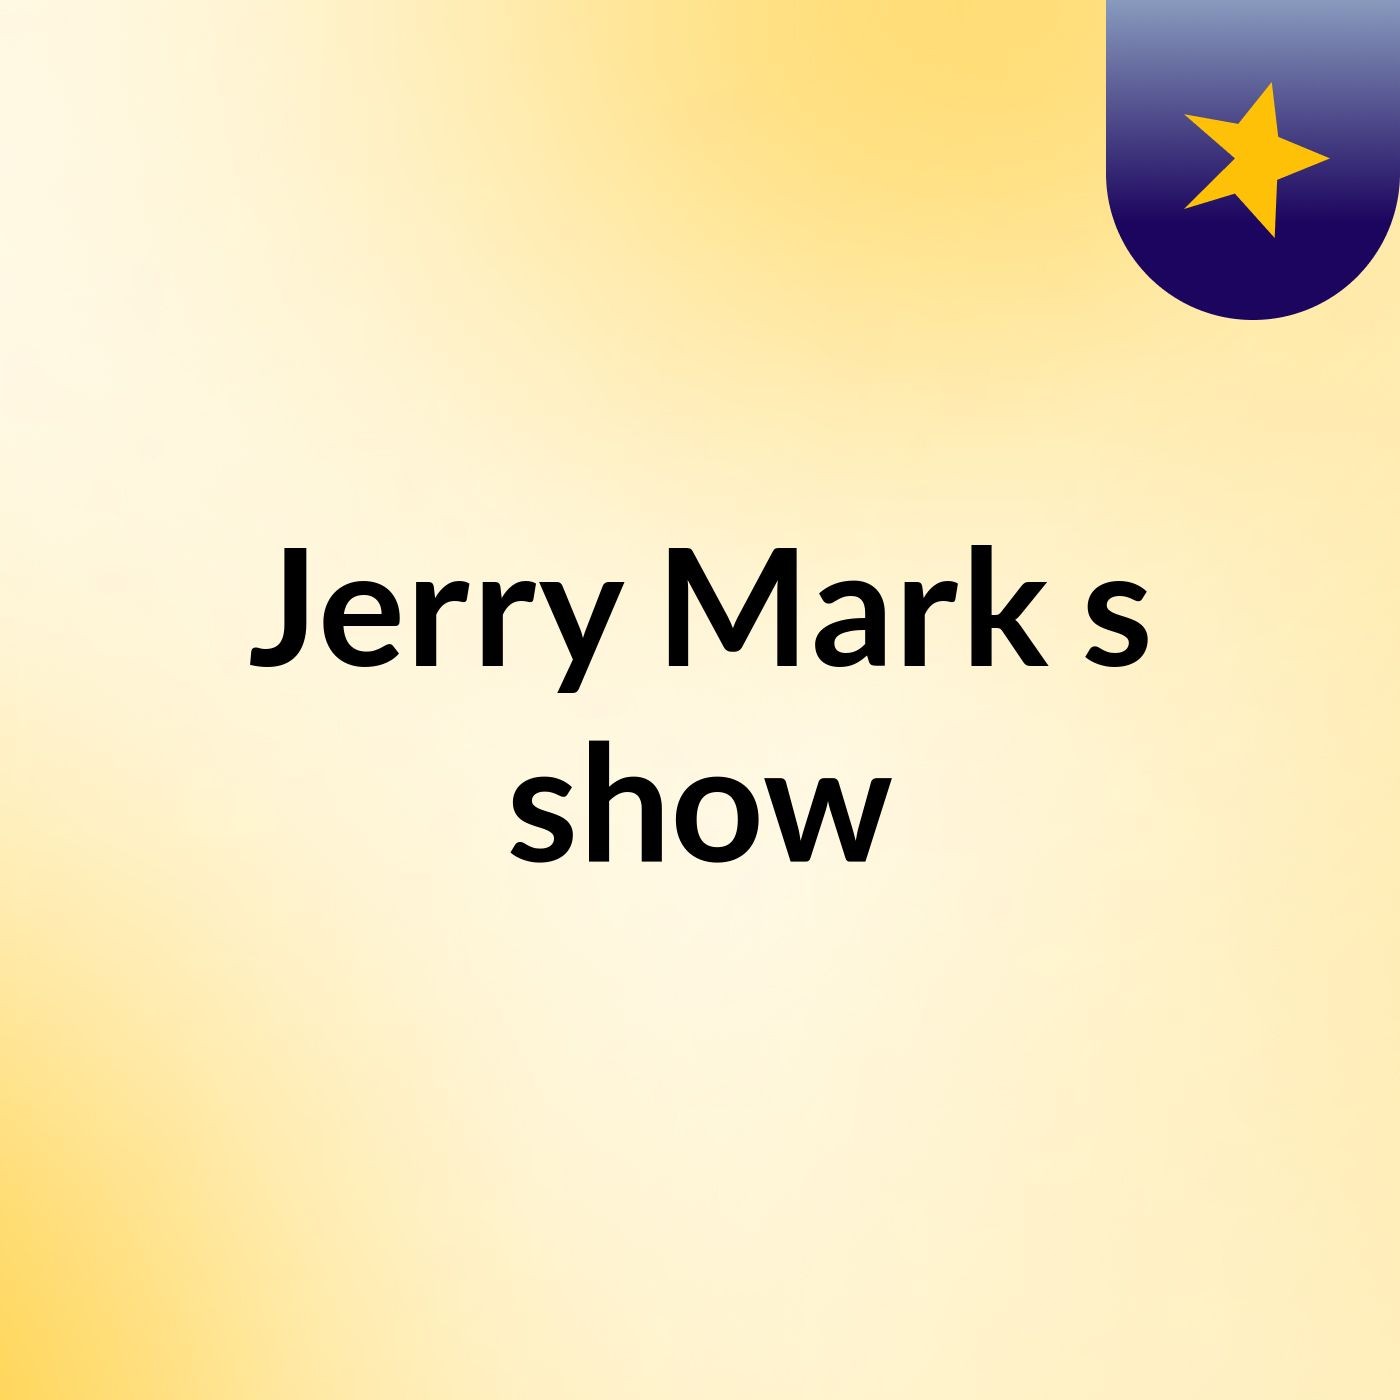 Episode 3 - Jerry Mark's show